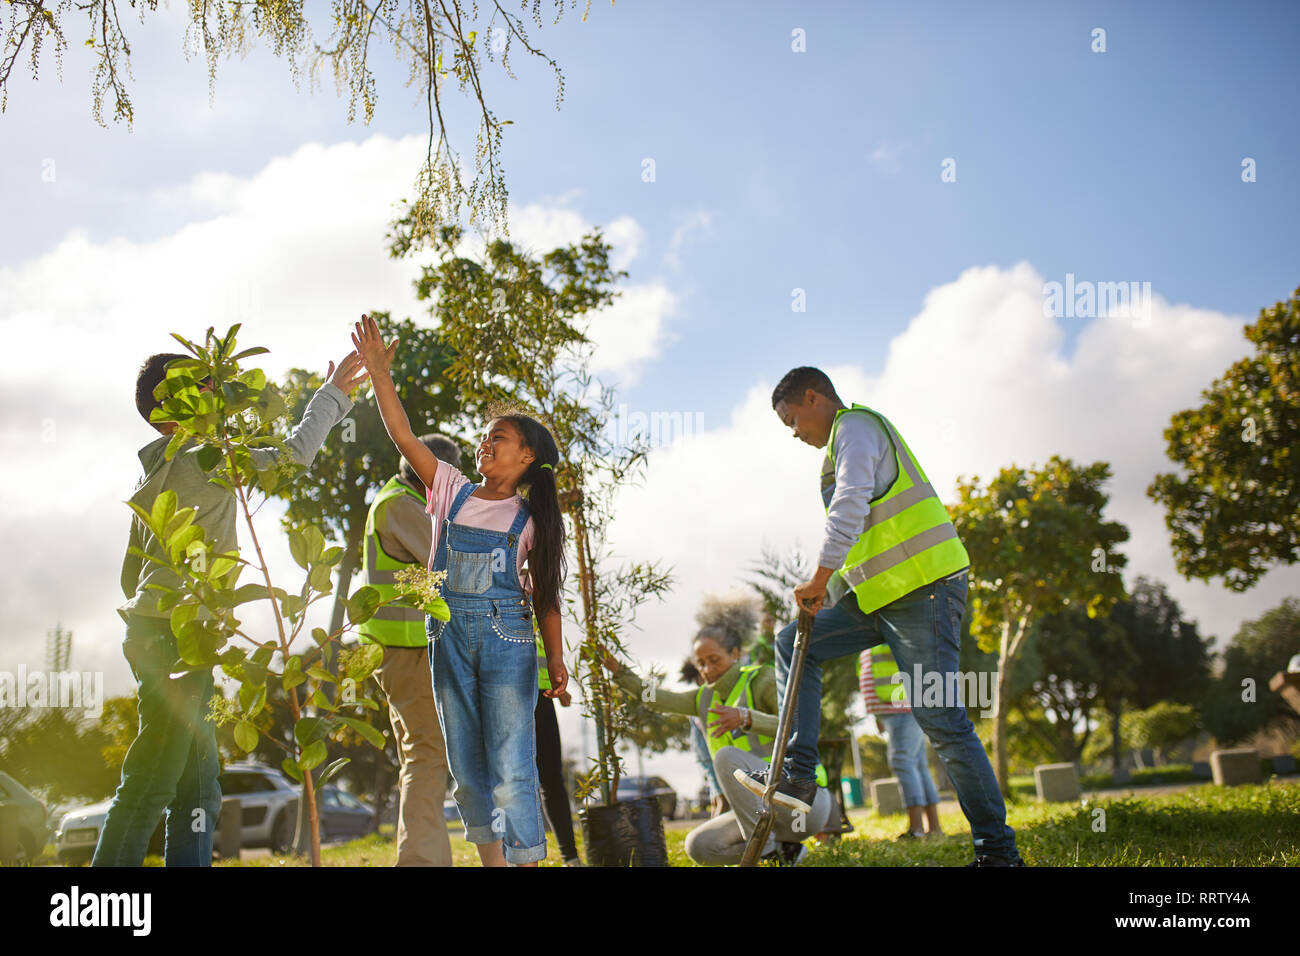 Kid volunteers high-fiving, planting trees in sunny park Stock Photo